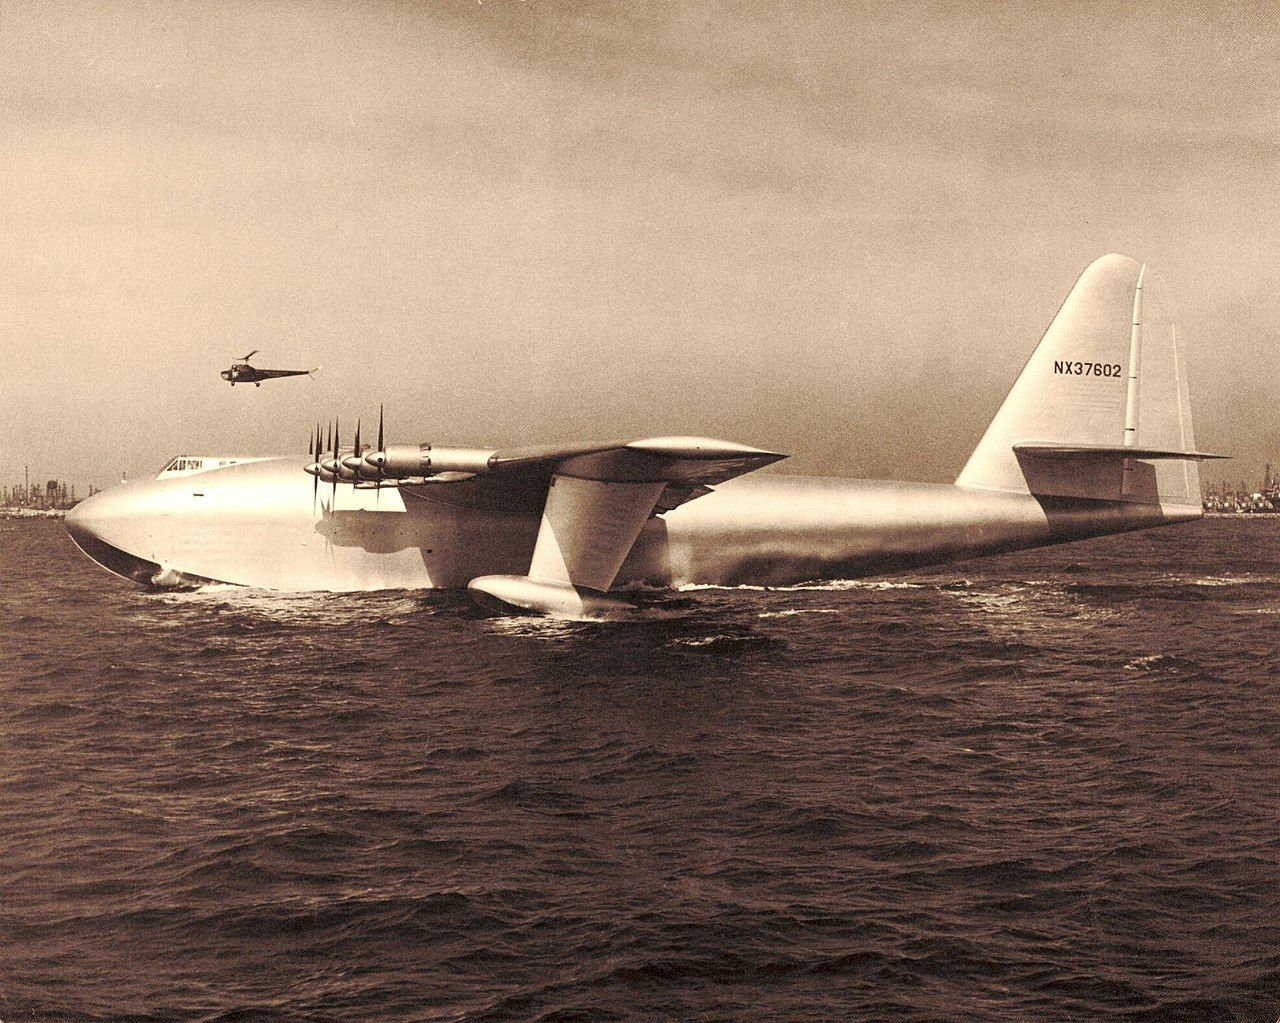 The Hughes H-4 Hercules Spruce Goose floating in water.